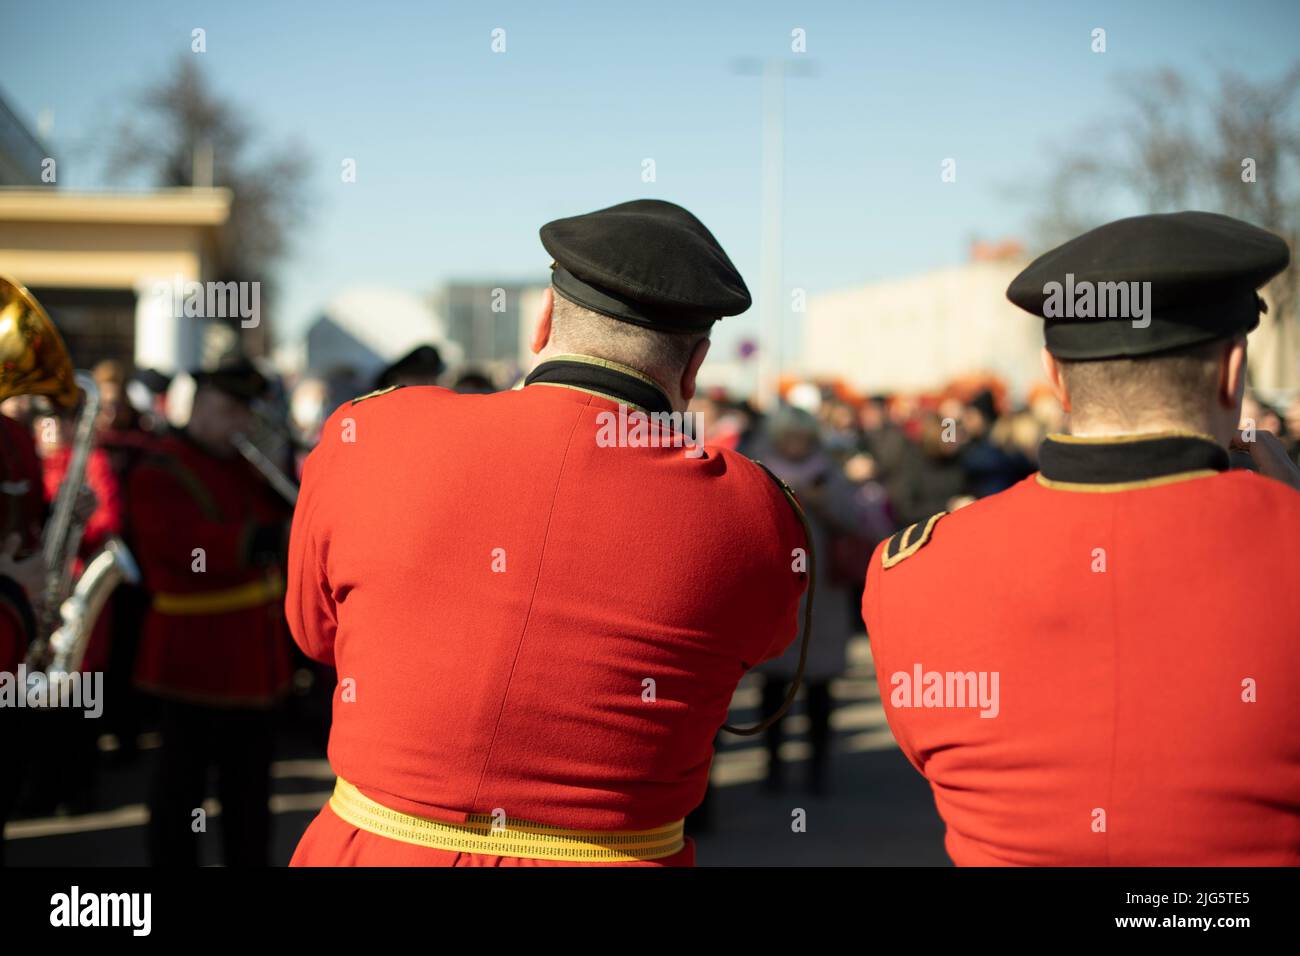 Military band in parade. Trumpeters on street. Trumpeter plays tune. Orchestra in Russia. Red ceremonial uniform. Stock Photo